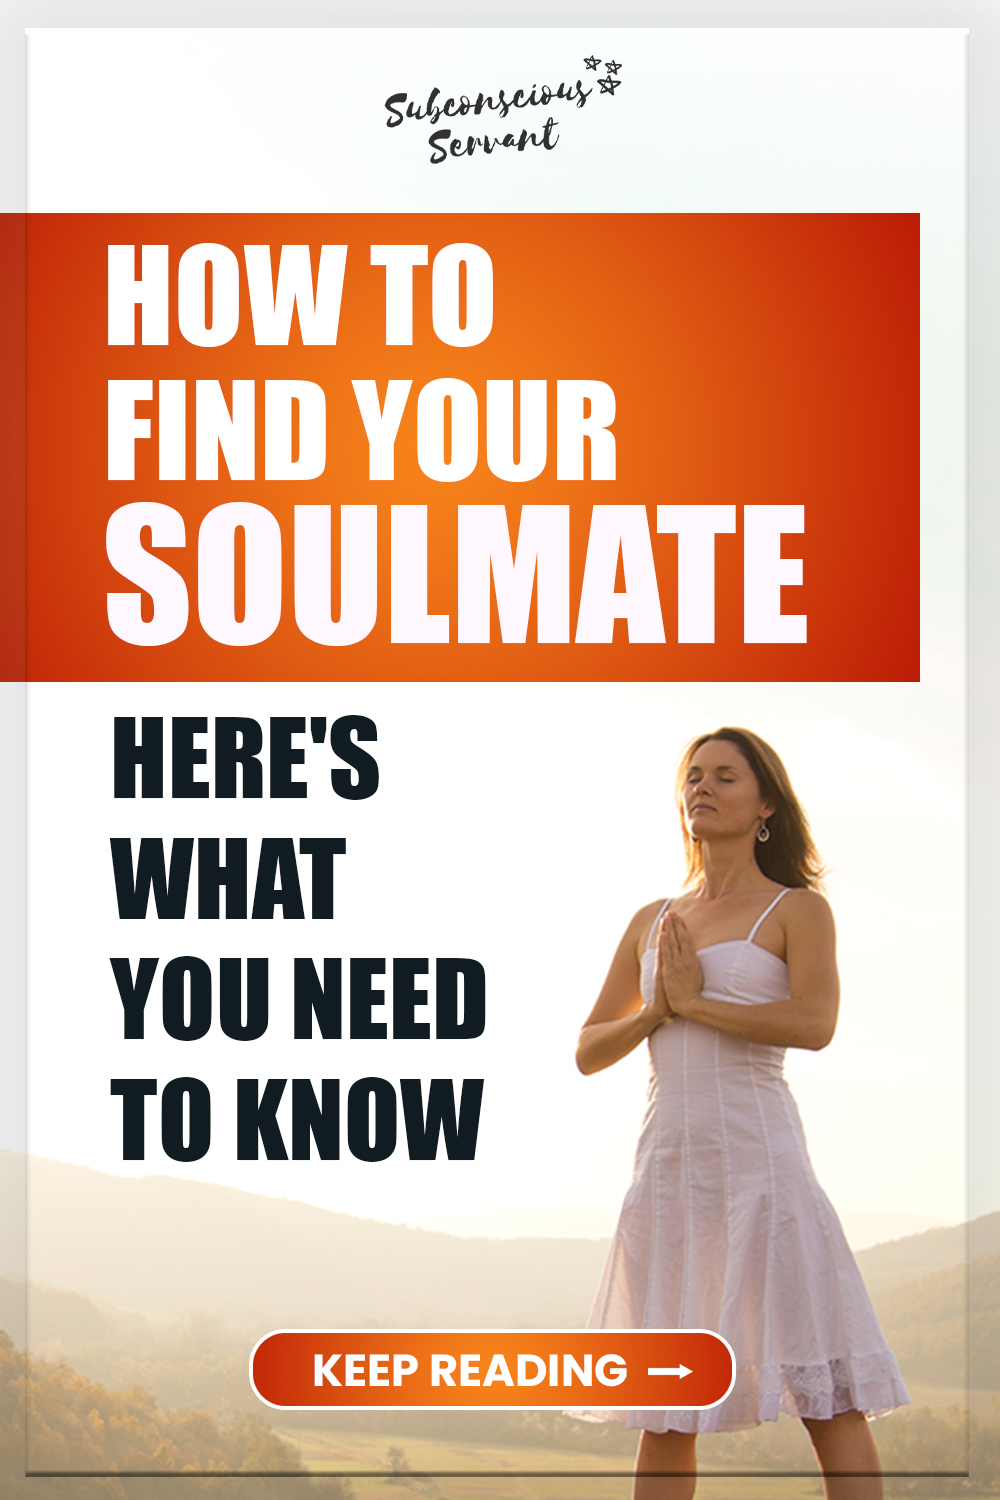 How To Find Your Soulmate (Here's What You NEED To Know)